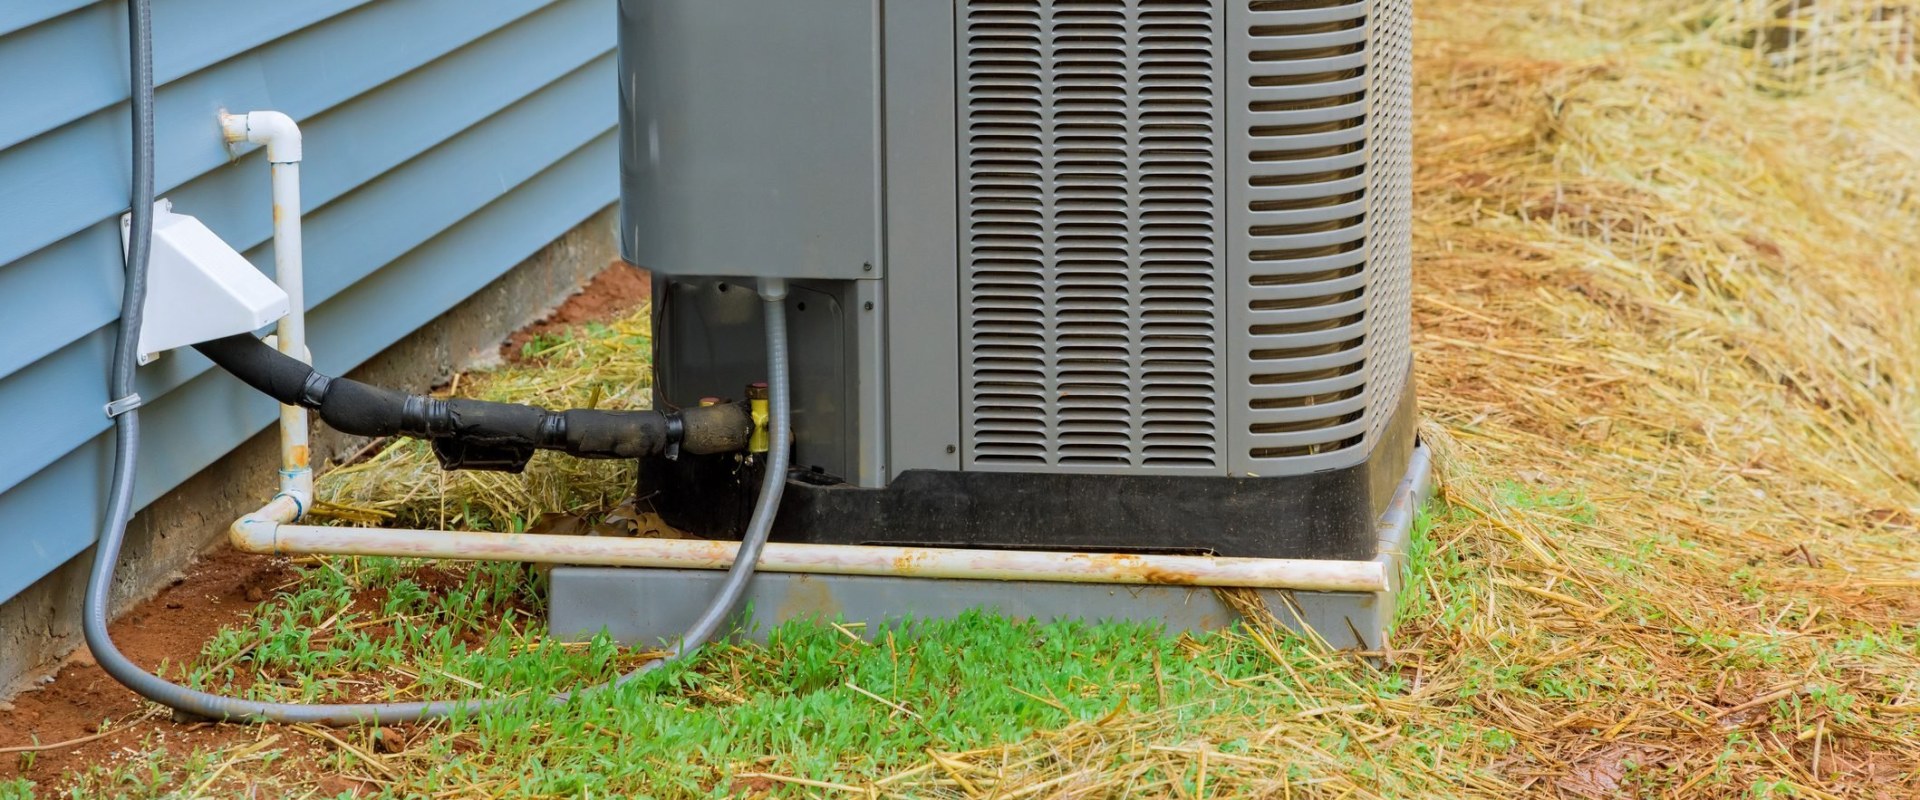 Is high-efficiency hvac system worth extra cost?